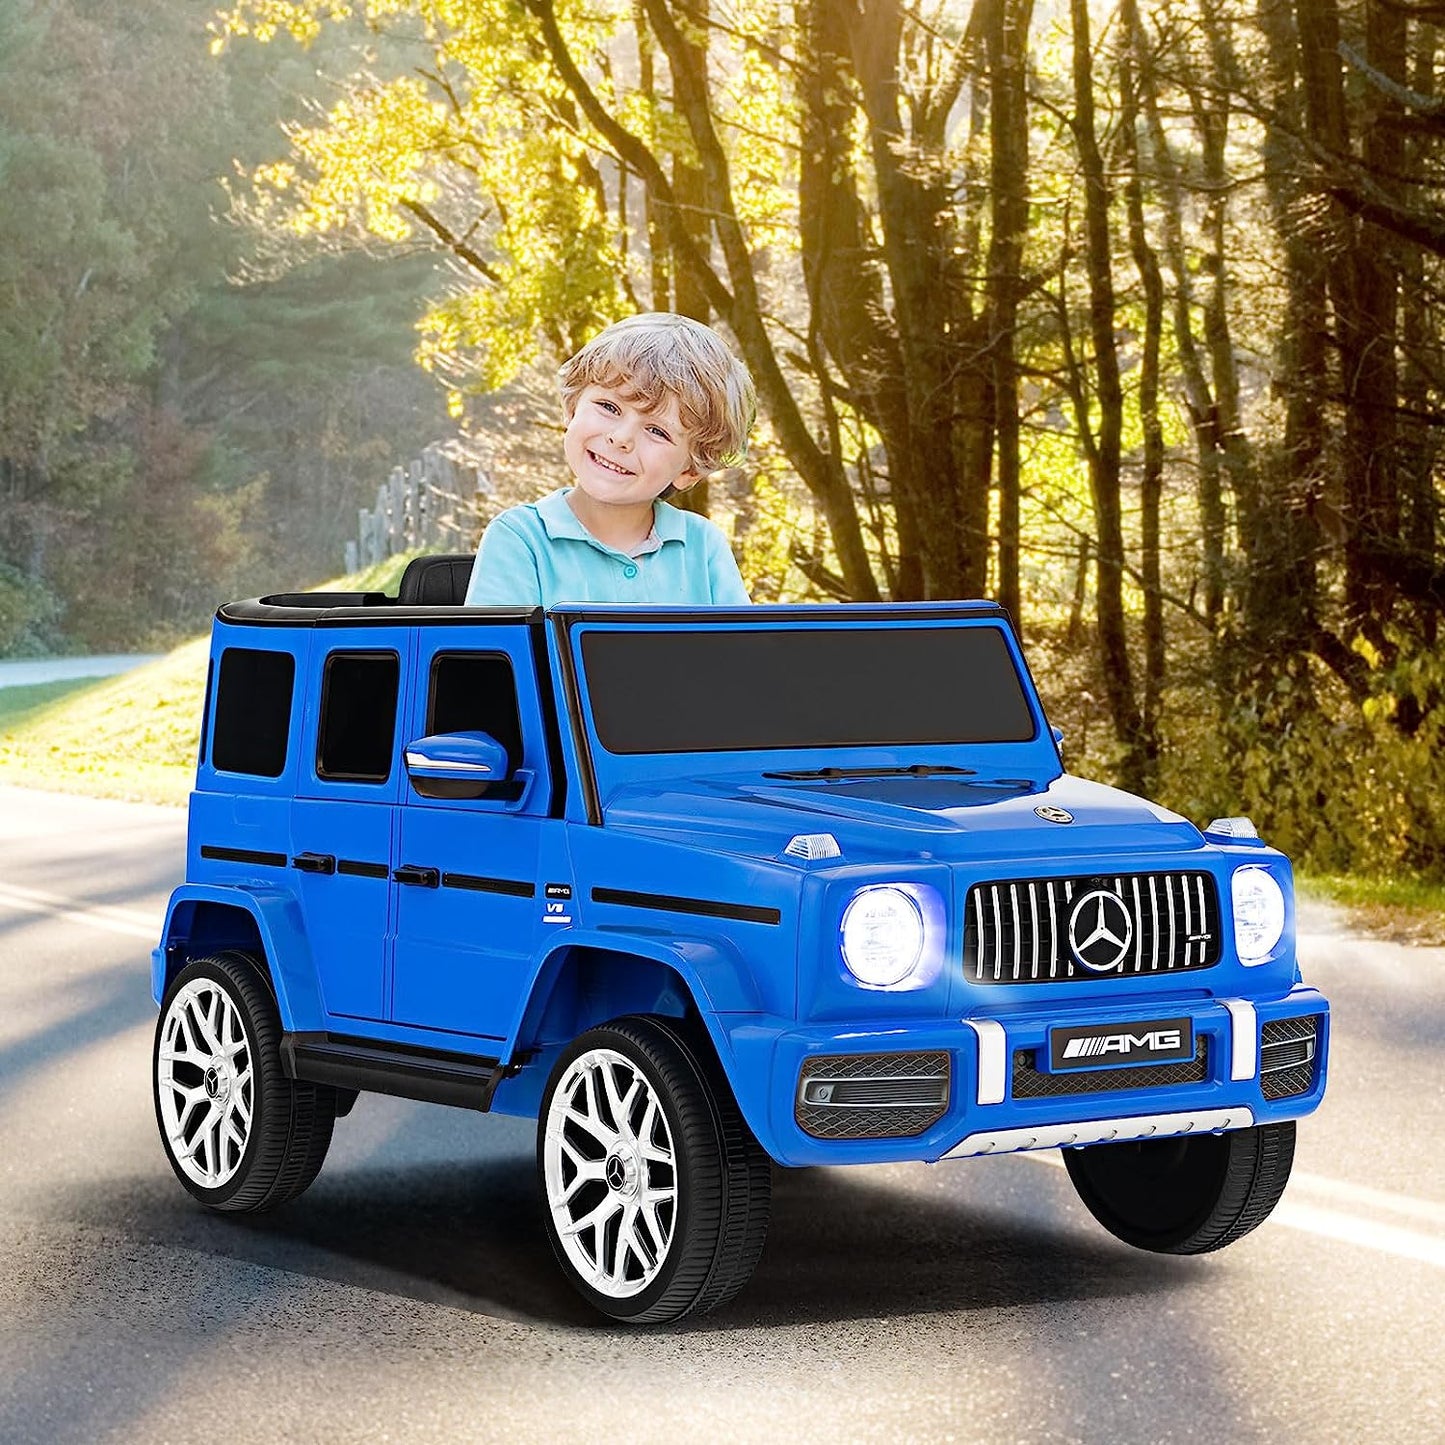 OLAKIDS 12V Kids Ride On Car, Licensed Mercedes Benz G63 Electric Vehicle with Remote Control, Double Open Doors, Music, Bluetooth, 2 Speeds, Wheels Suspension, Battery Powered Driving Toy (White)